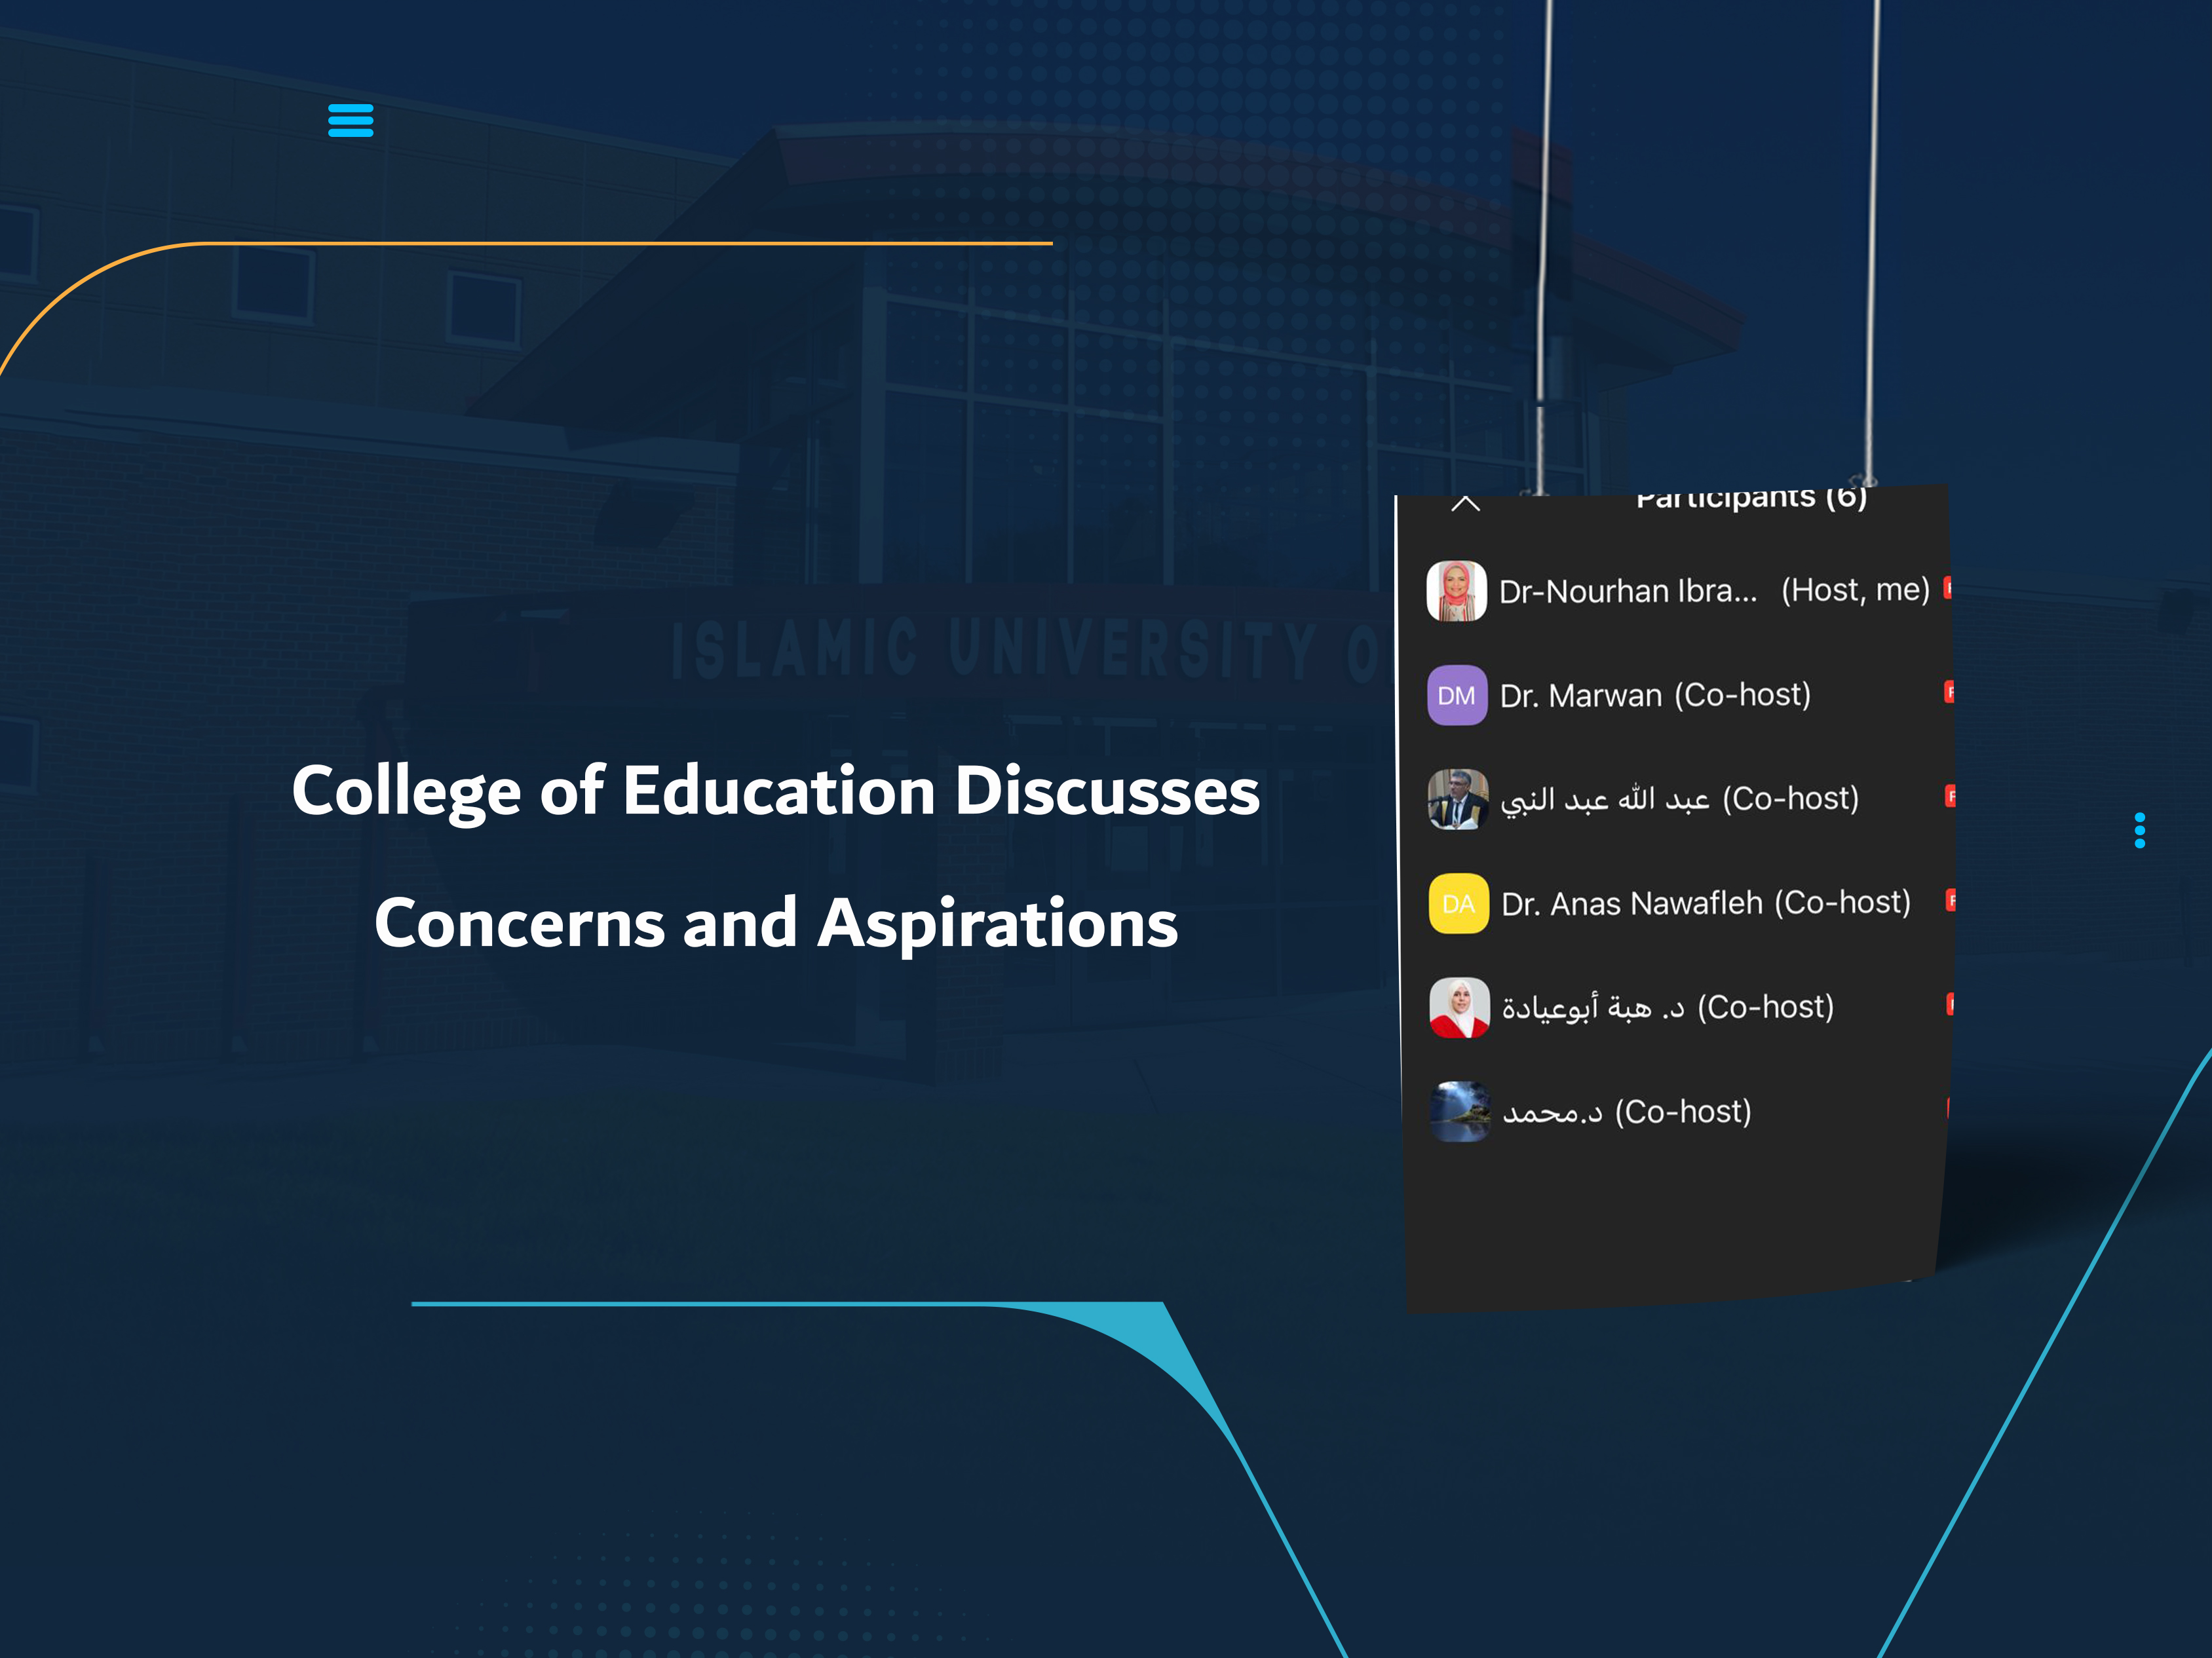 College of Education Discusses Concerns and Aspirations